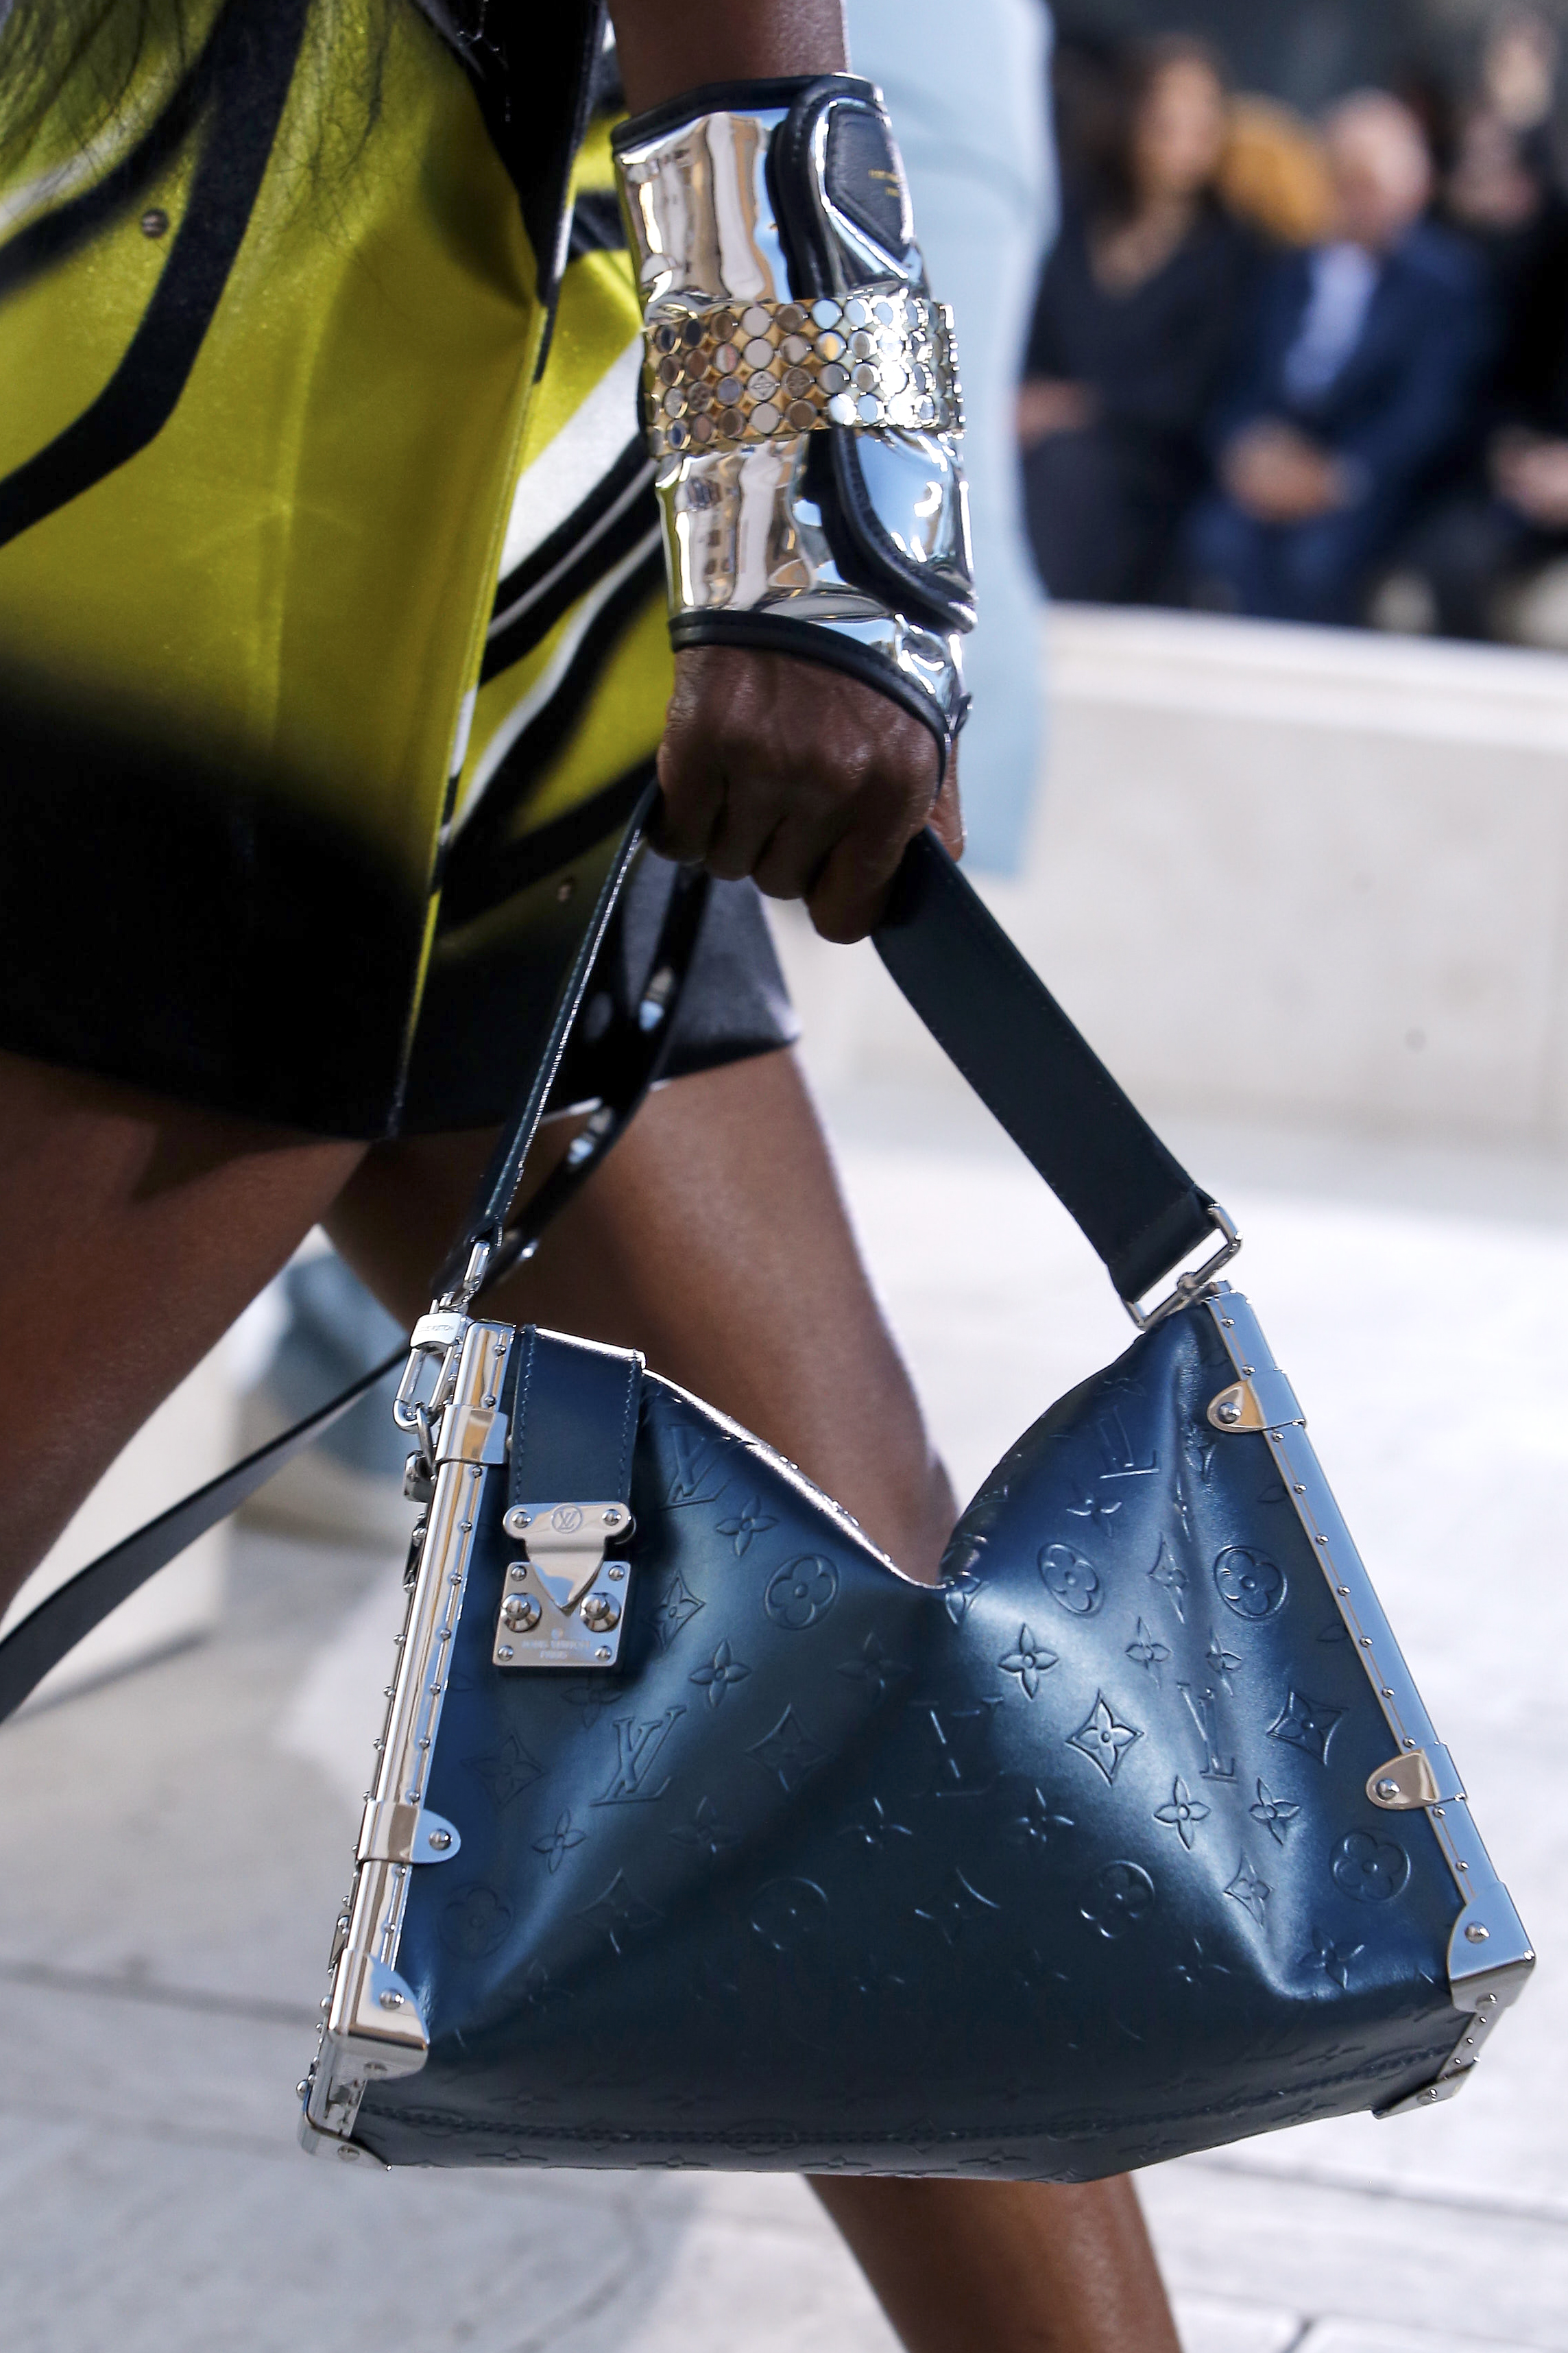 A closer look at a new handbag from the Louis Vuitton Cruise 2018